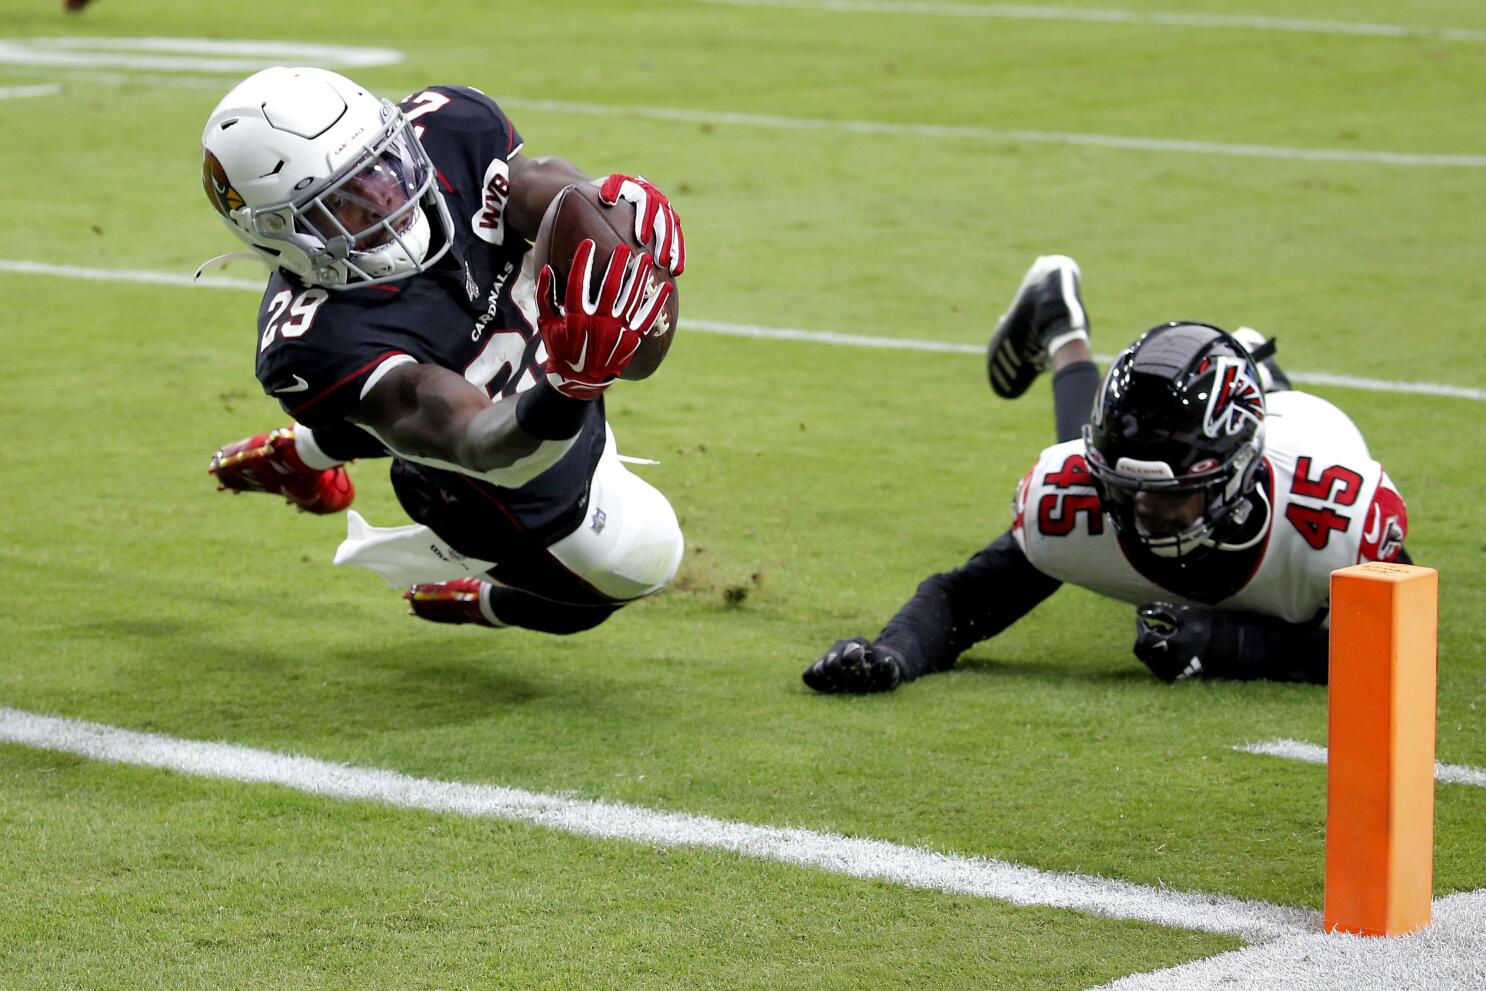 Cardinals beat Falcons 34-33 after Bryant's extra point miss - The